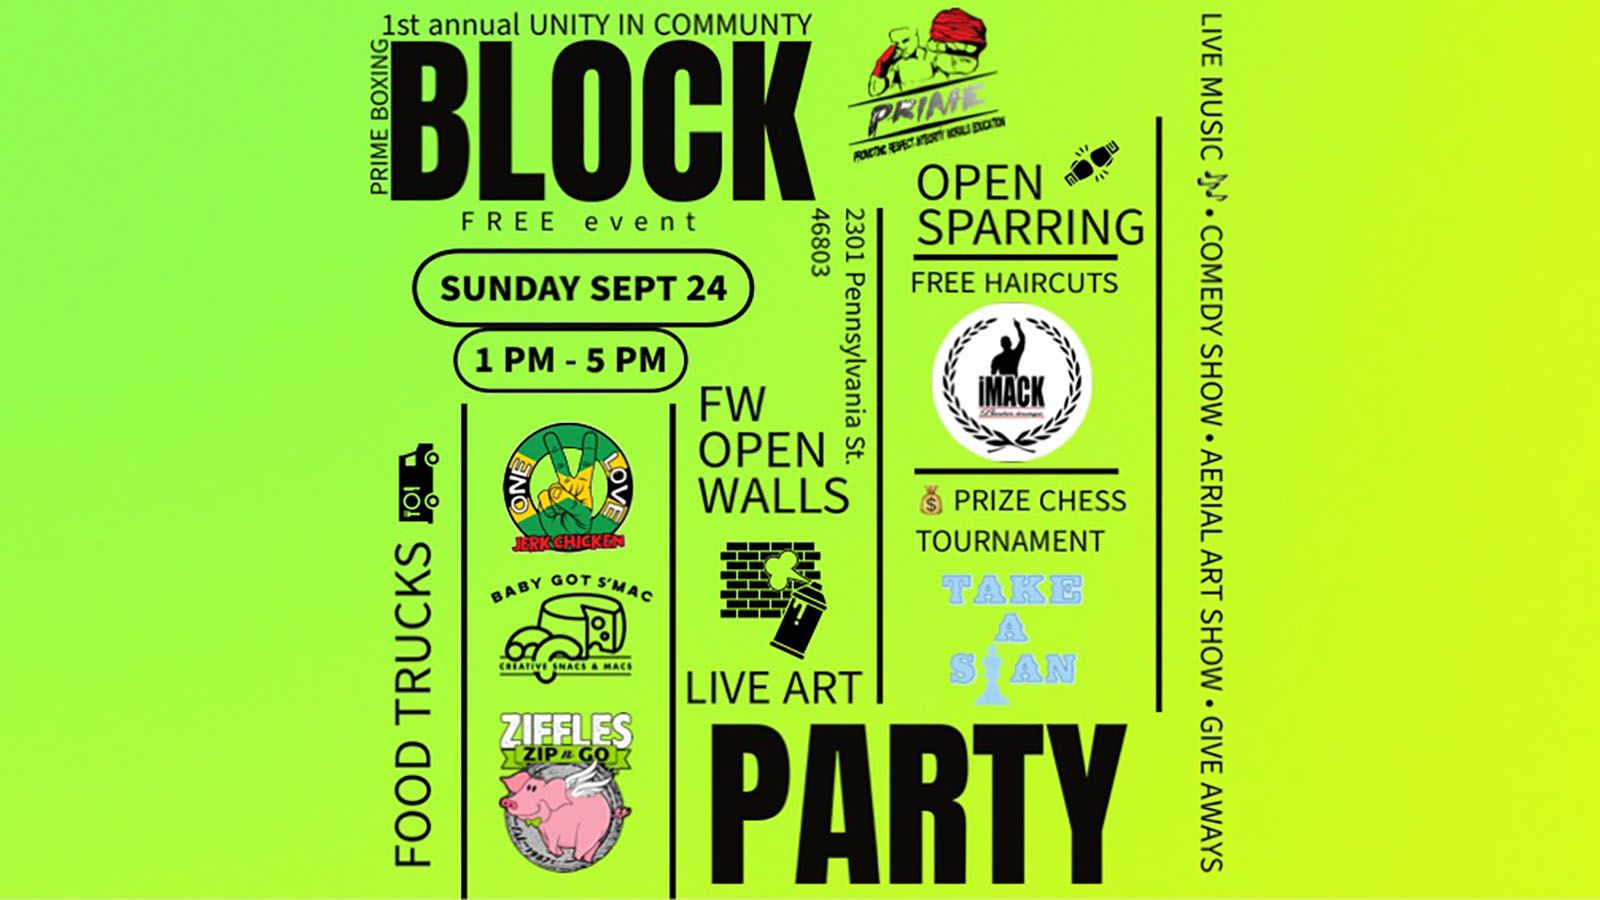 The Unity in Community Block Party will be Sunday, Sept. 24, outside Prime Boxing.